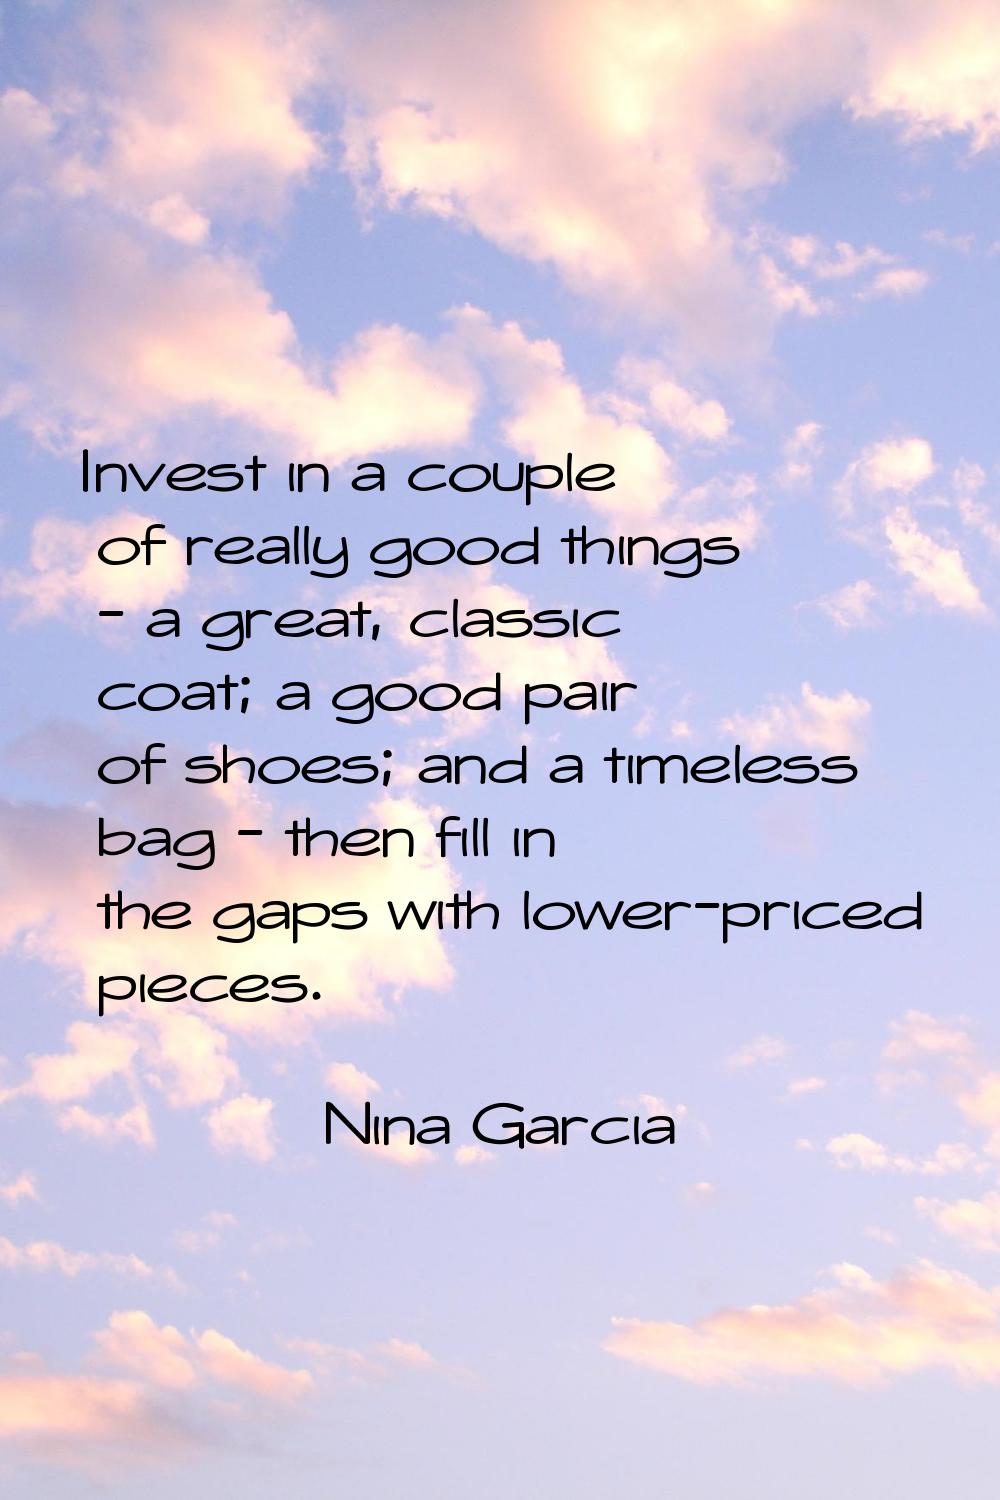 Invest in a couple of really good things - a great, classic coat; a good pair of shoes; and a timel